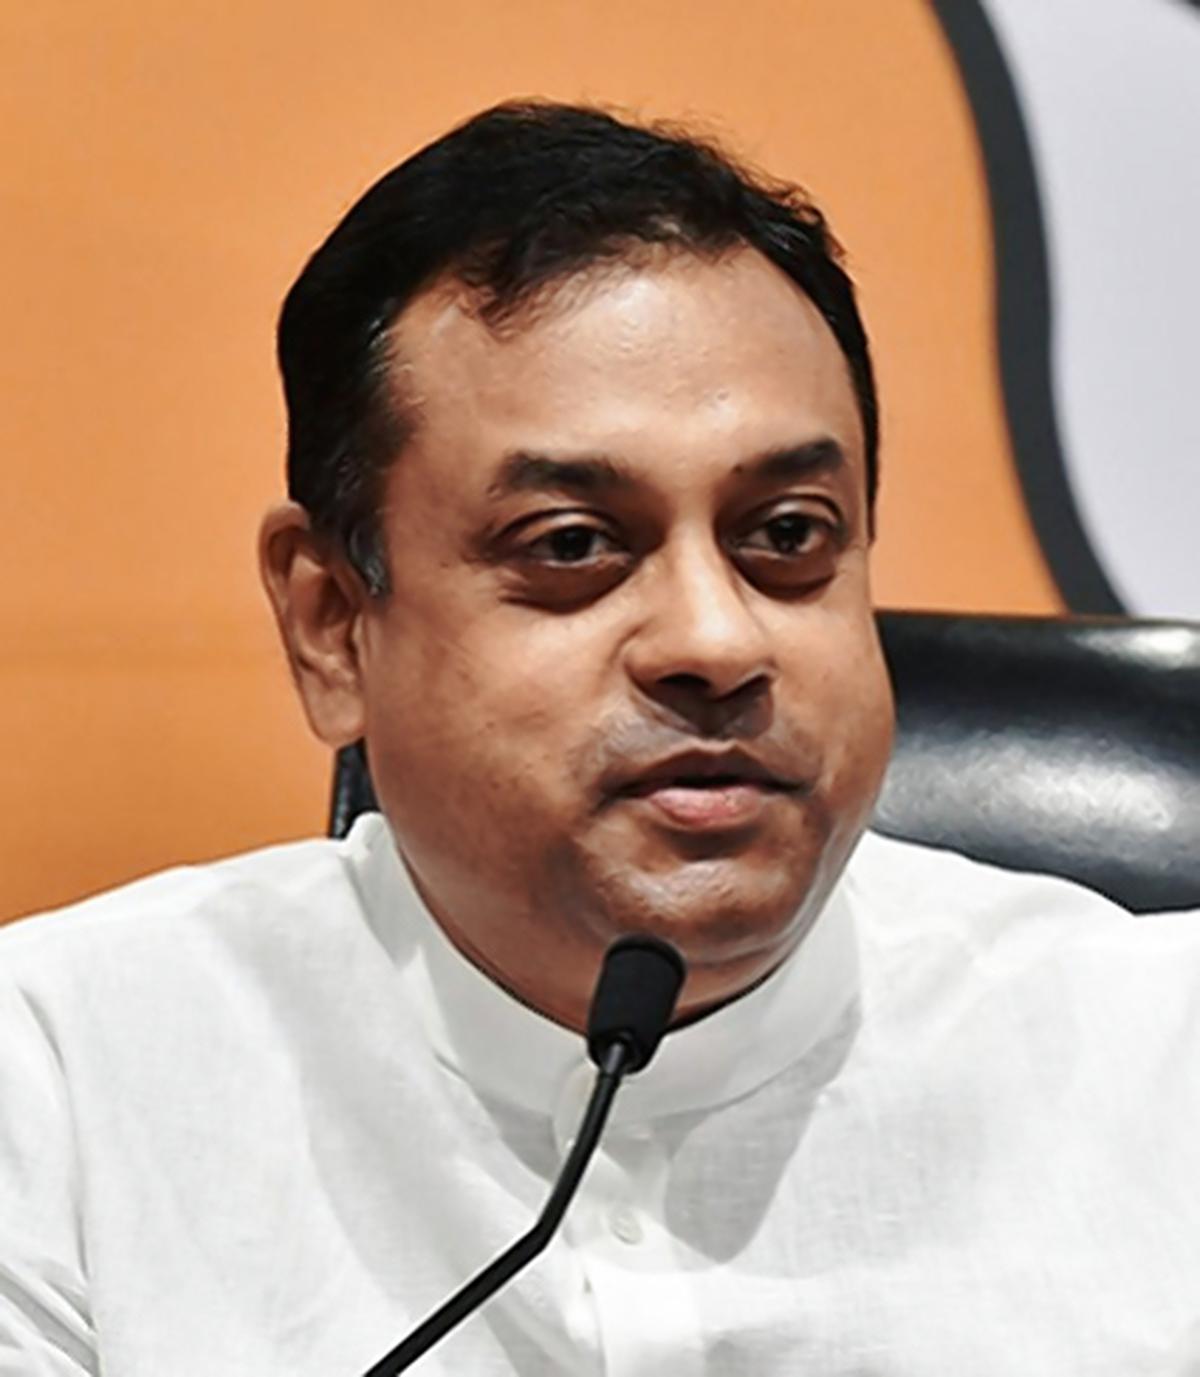 AAP seeks action against BJP's Sambit Patra for violating CCS Conduct Rules